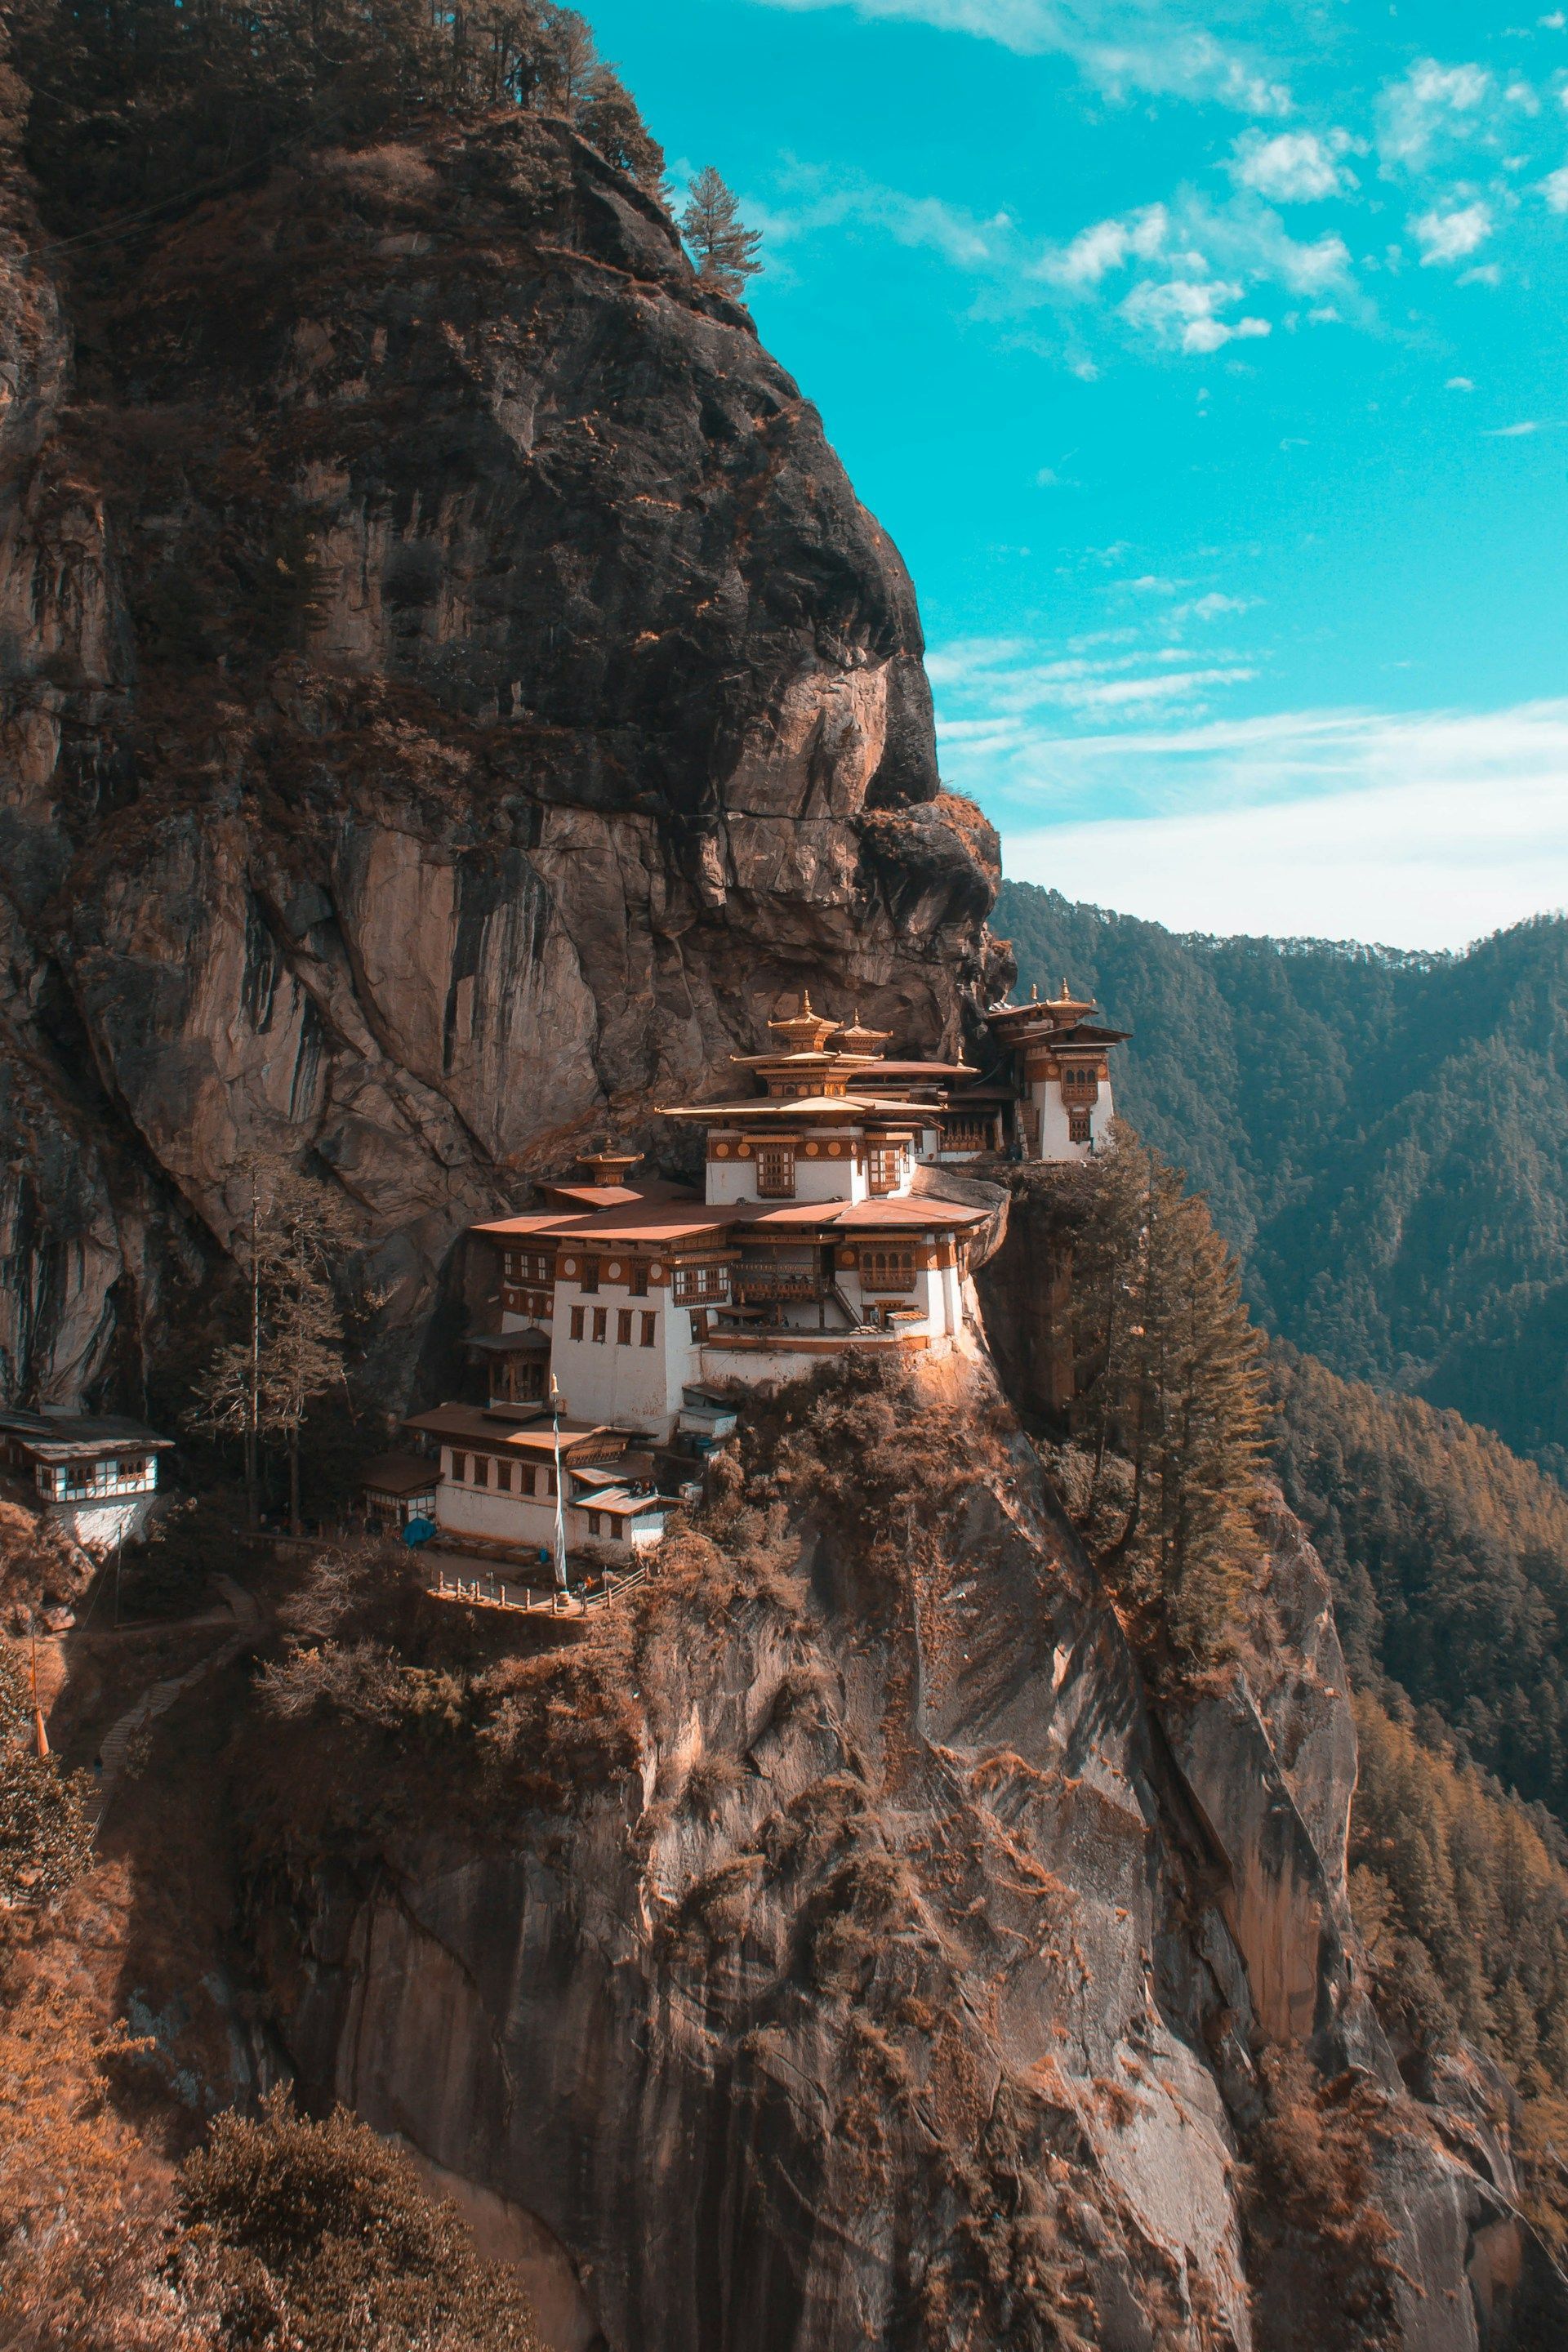 A group of buildings sitting on top of a mountain.